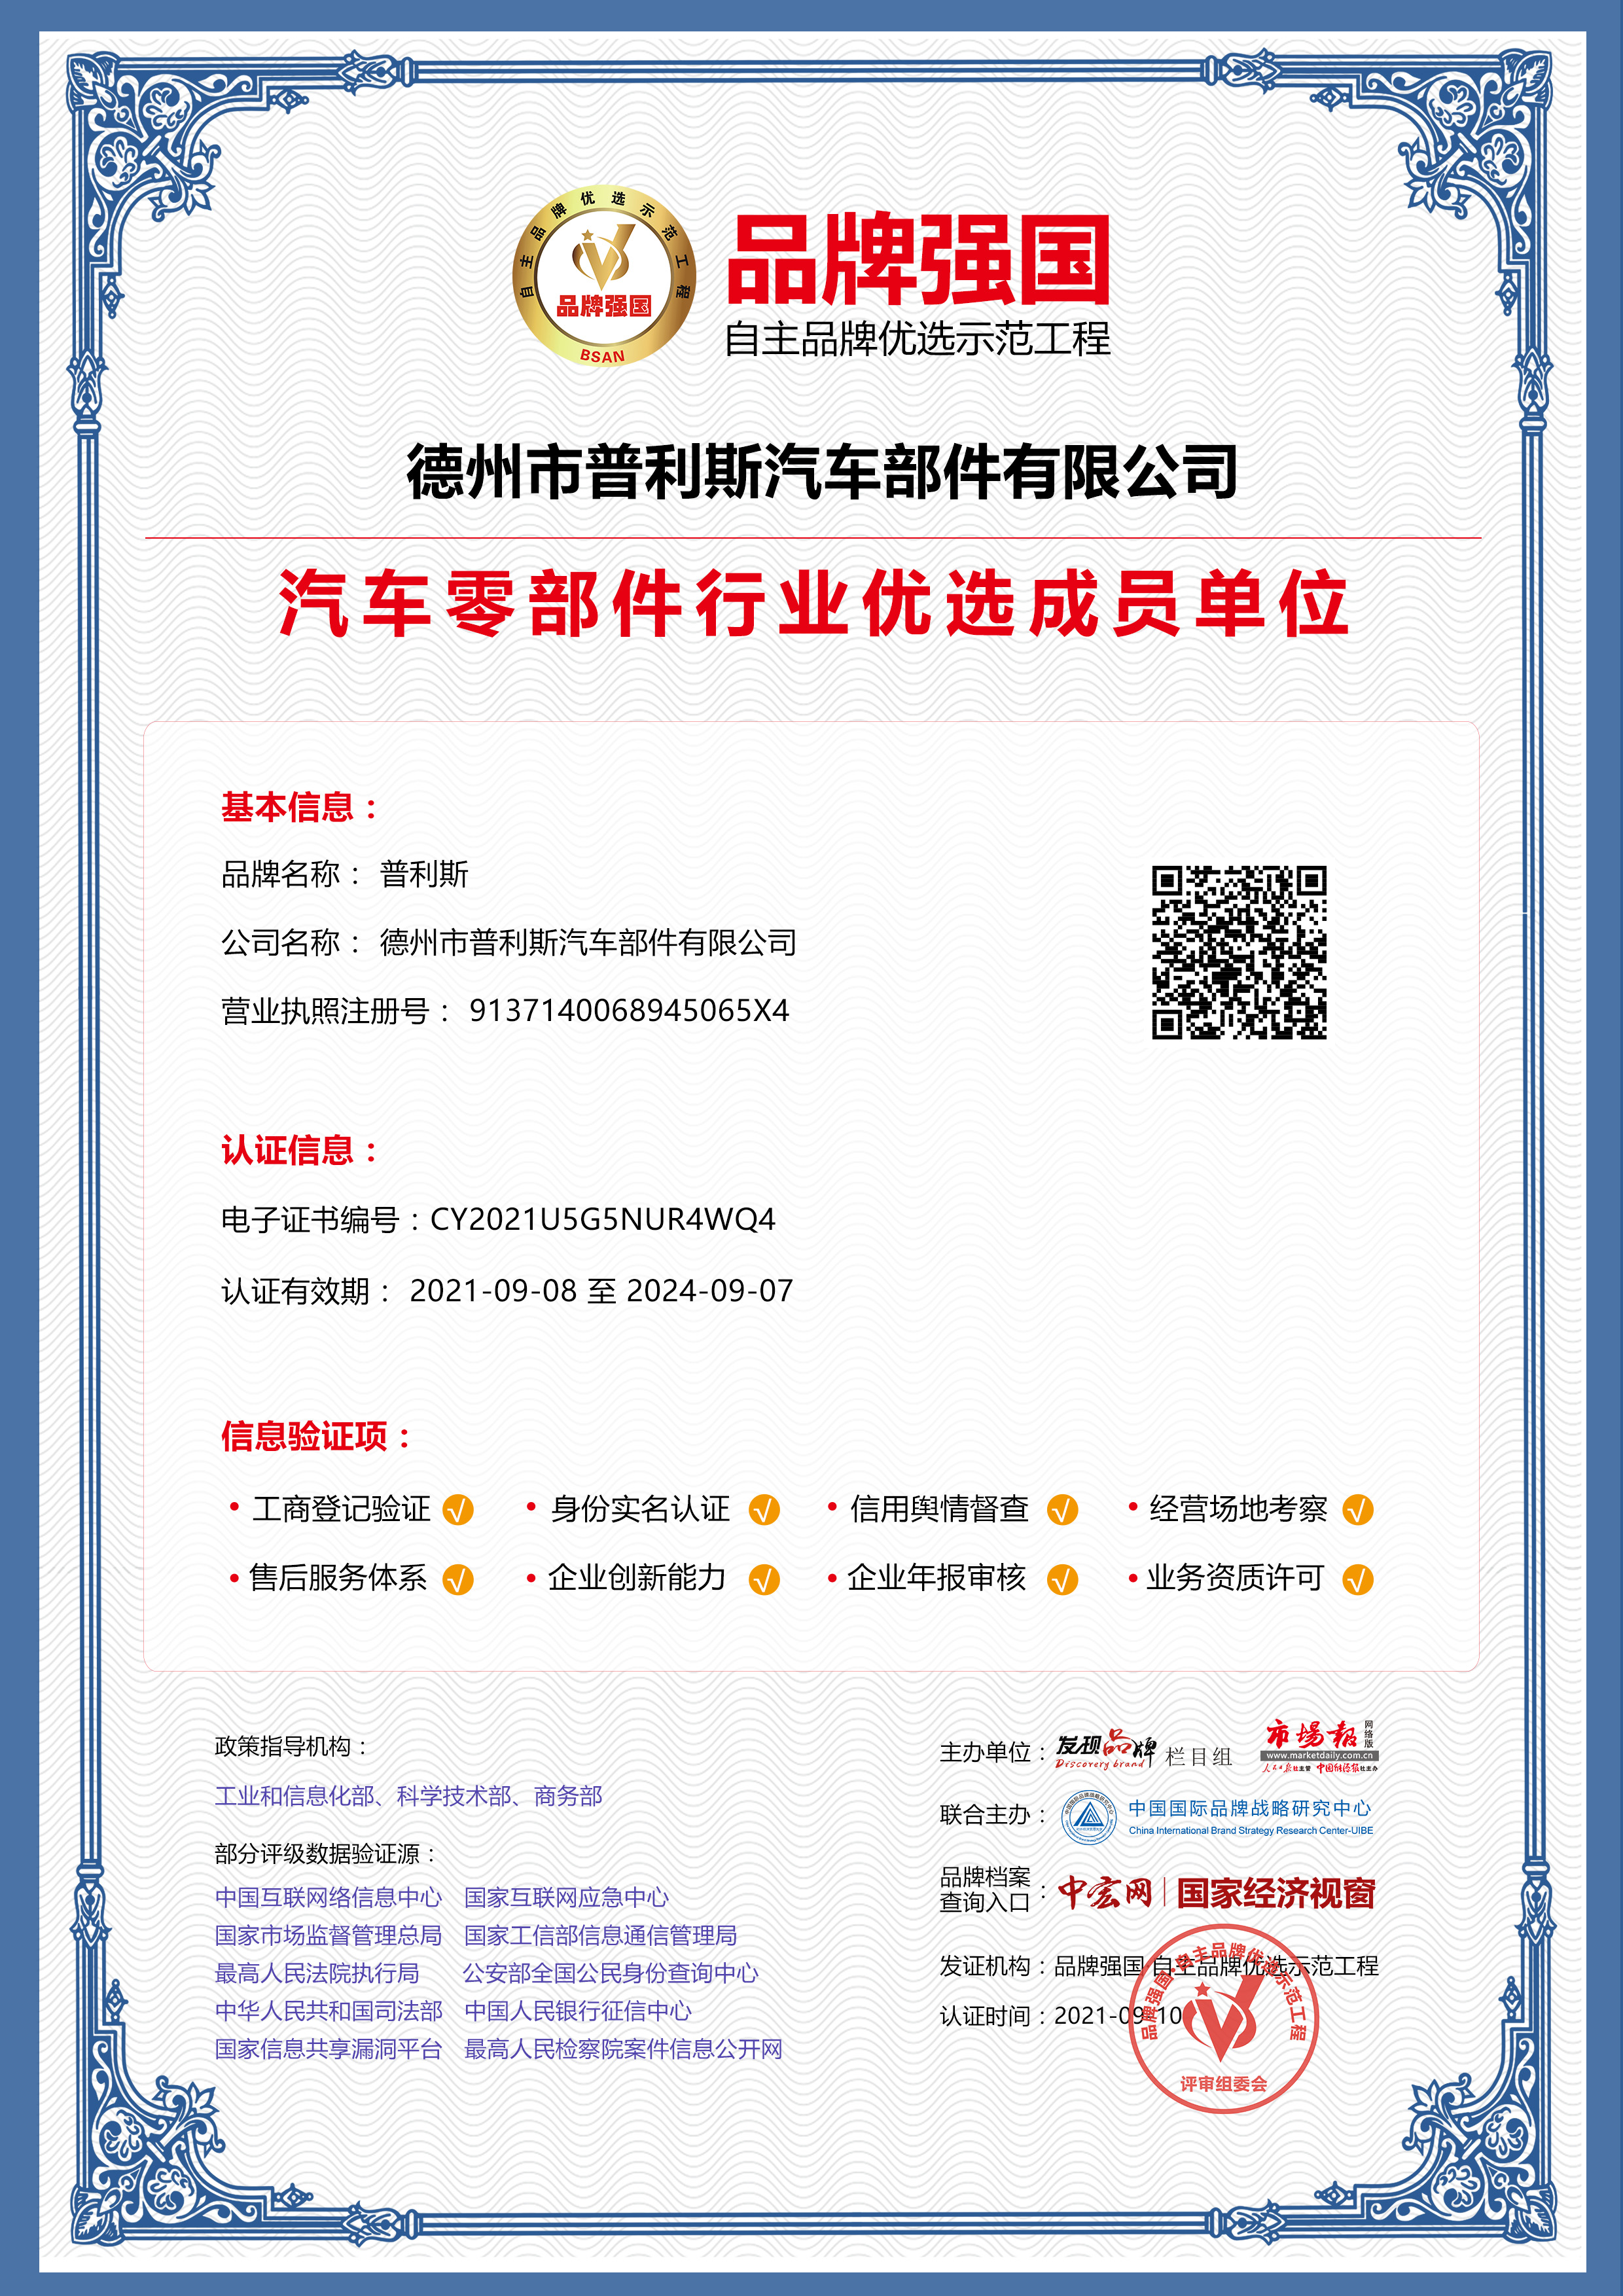 Certificate Environmental Management System